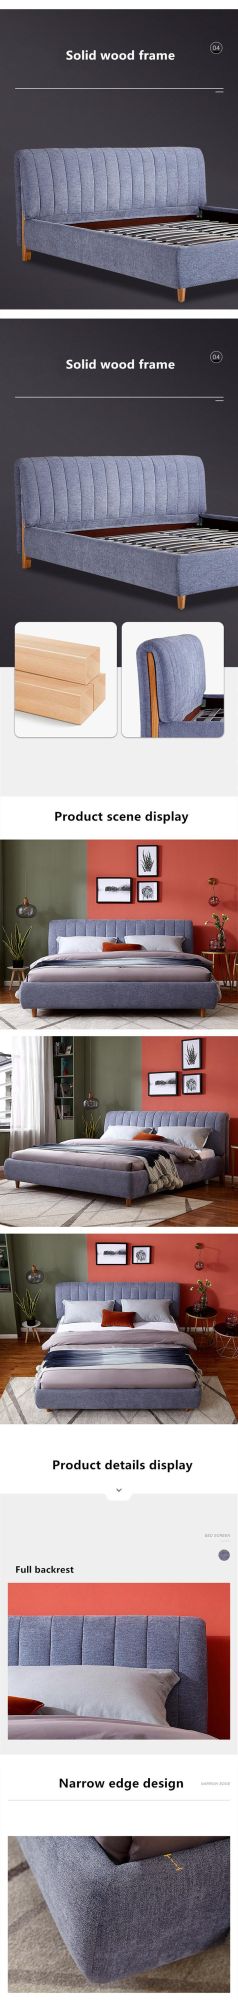 Modern Nordic Furniture Nordic Style Soft #Bed 0178-2